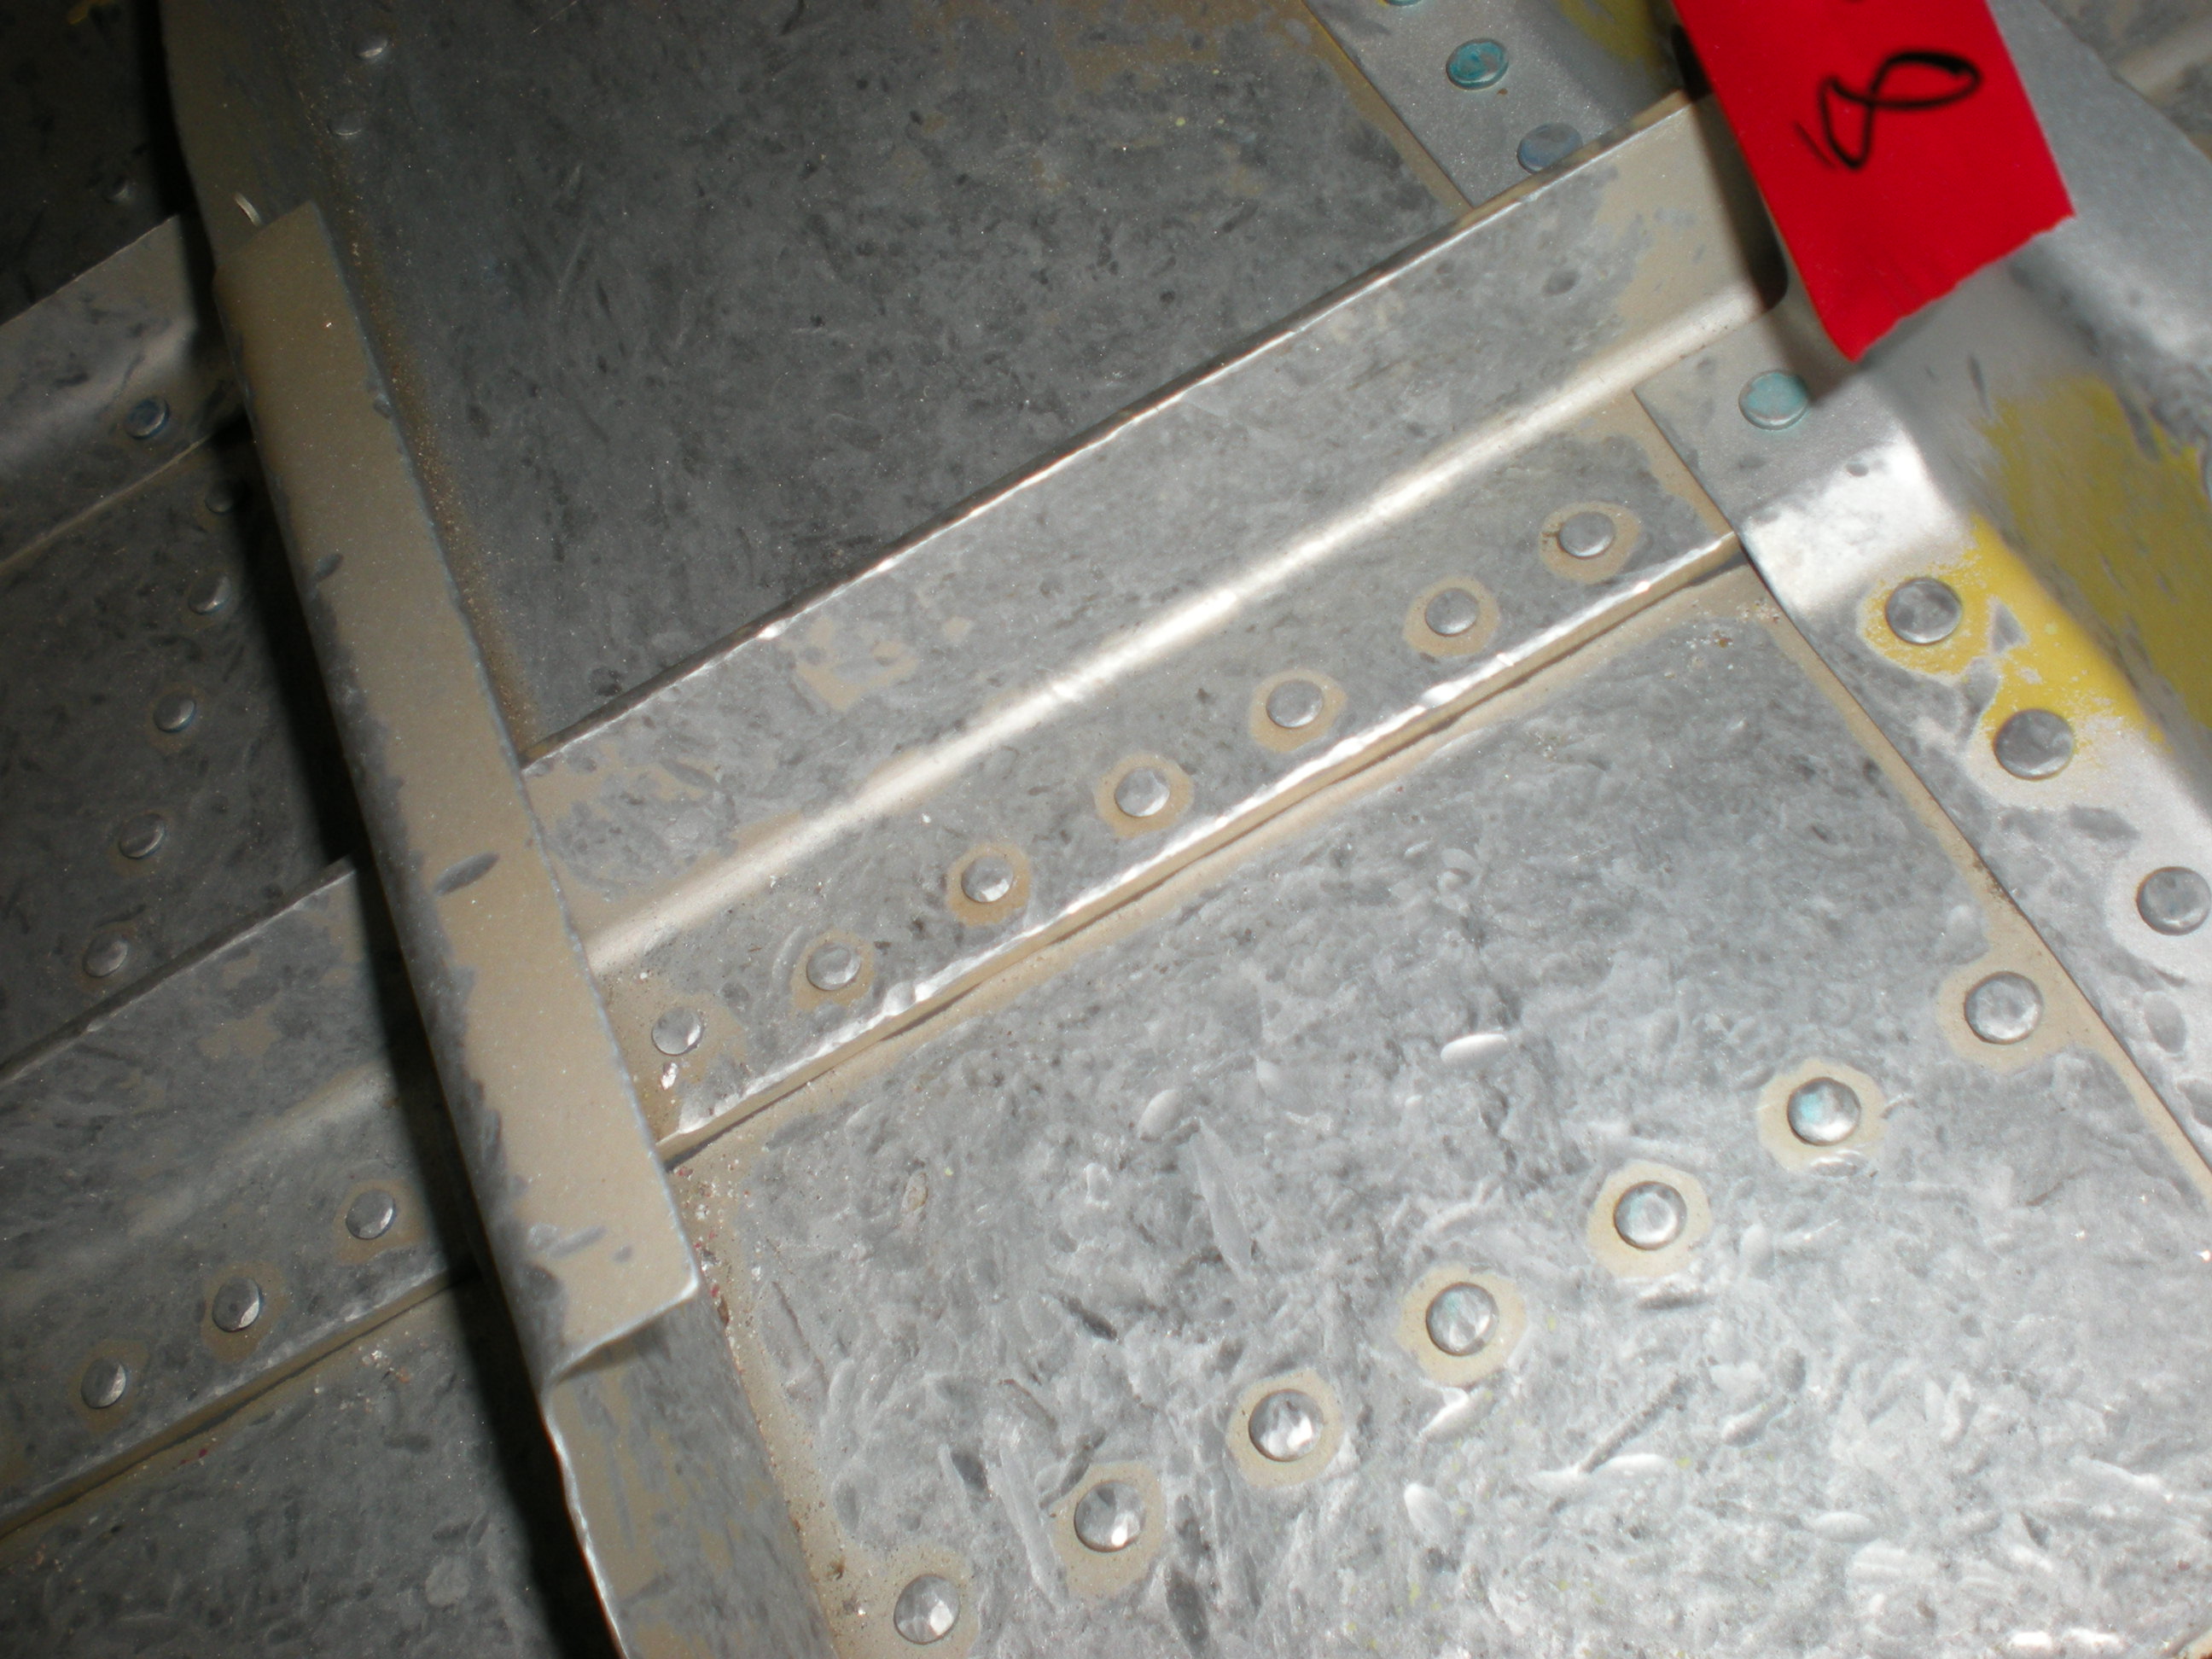 Example of damage in canted beam area on a D-model